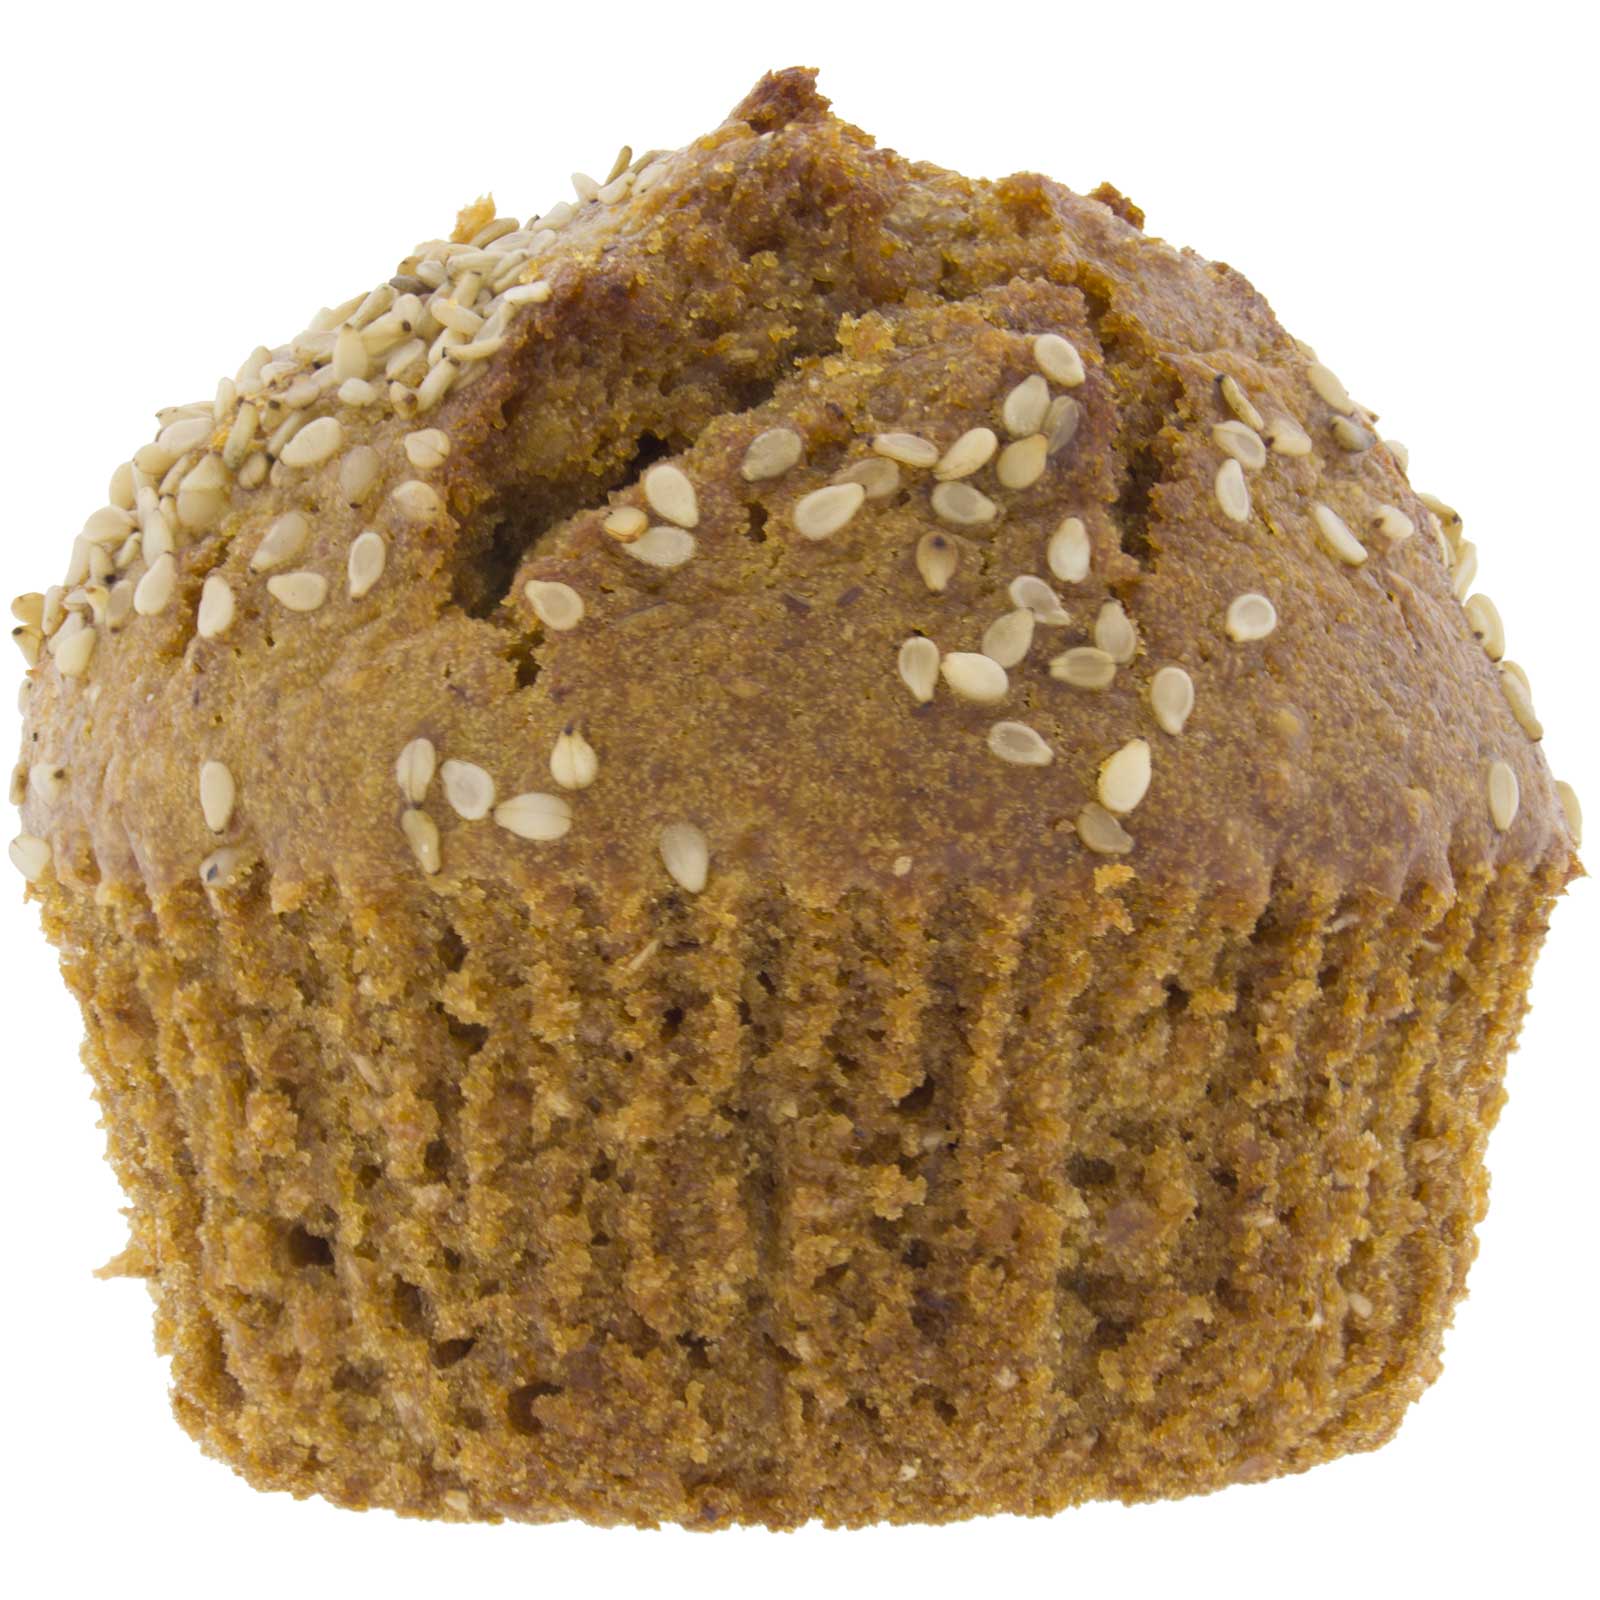 Sugar free whole sesame muffin 125g (2 pieces)